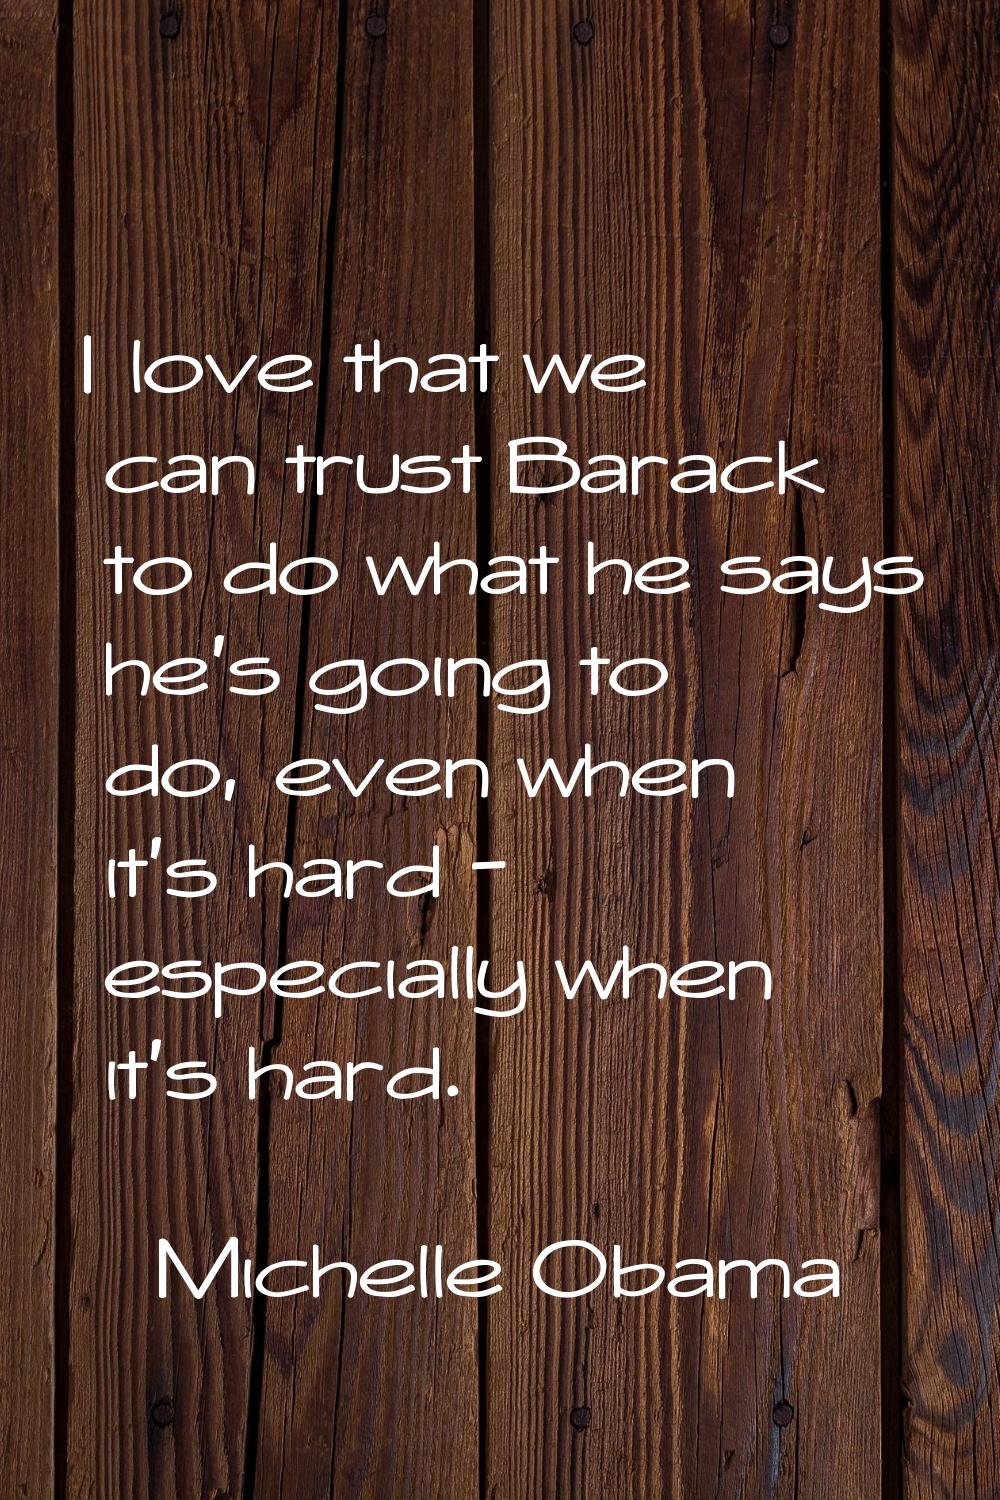 I love that we can trust Barack to do what he says he's going to do, even when it's hard - especial